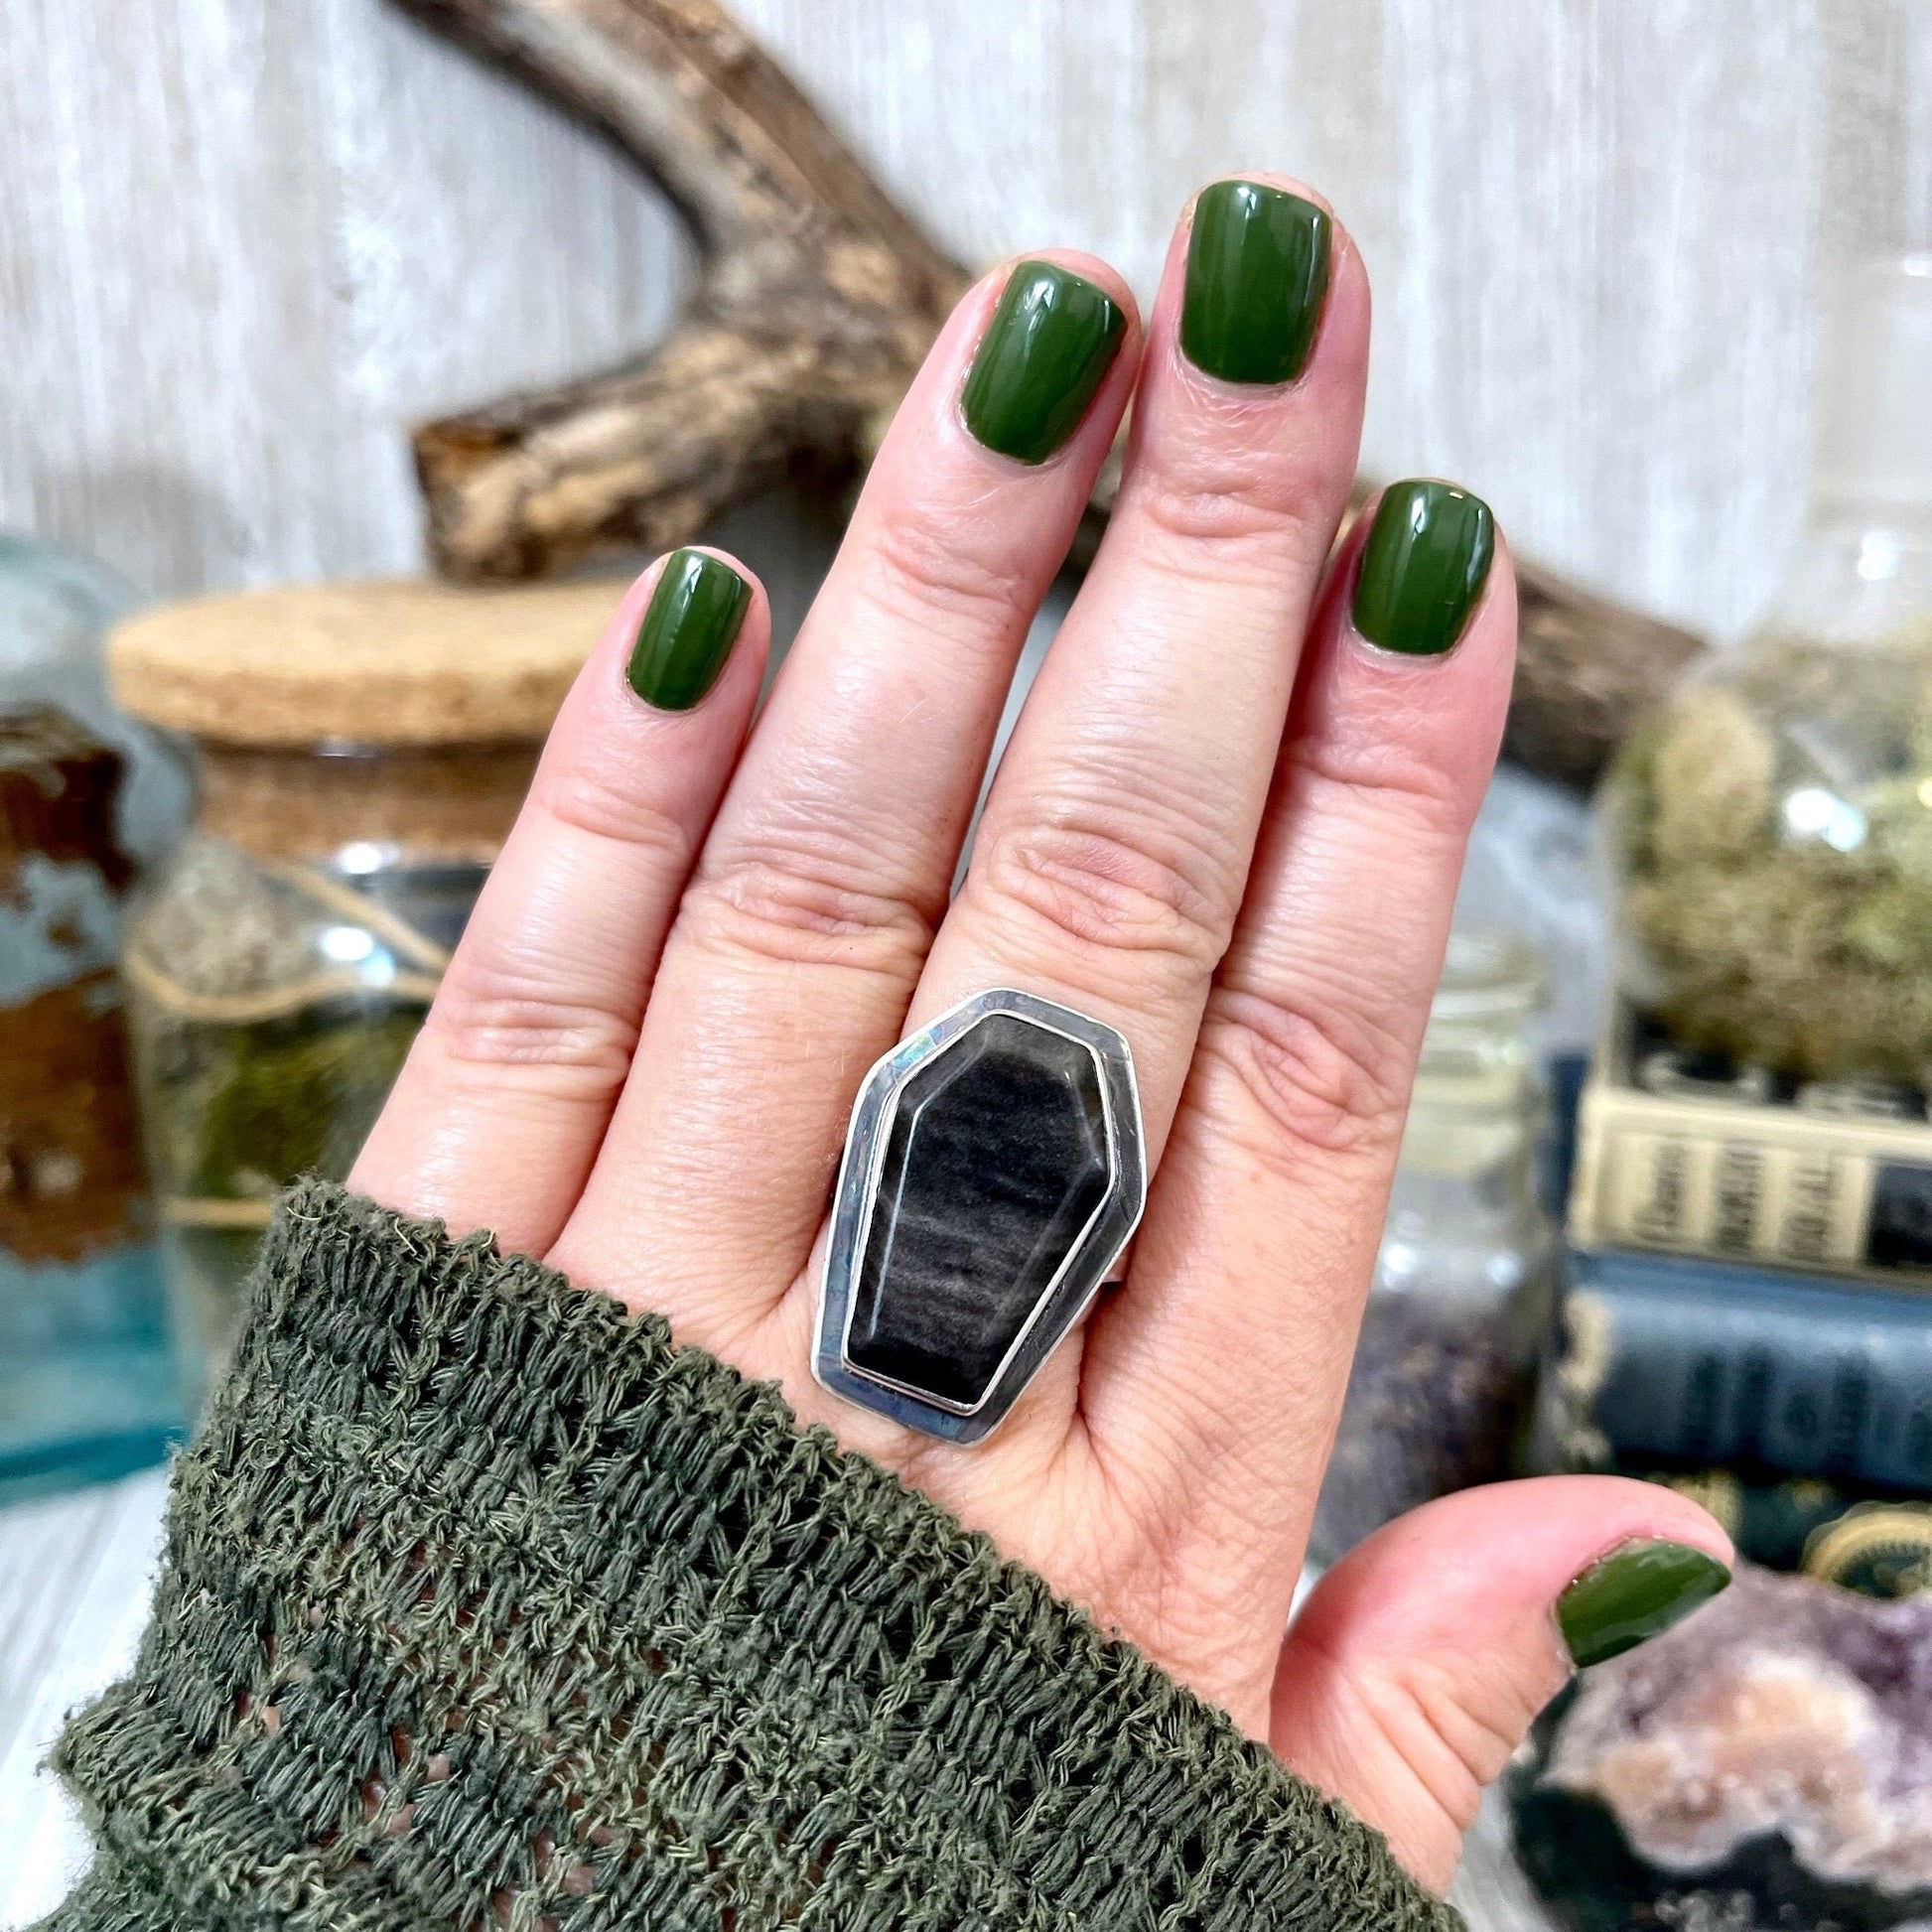 Black Stone Ring, Coffin Jewelry, Coffin Ring, Crystal Ring, Etsy Id 1088434750, Foxlark Alchemy, FOXLARK- RINGS, Goth Jewelry, Gypsy Ring, Halloween Jewelry, Halloween Ring, Jewelry, Moon Jewelry, Rings, Statement Rings, Wholesale, Witch Jewelry